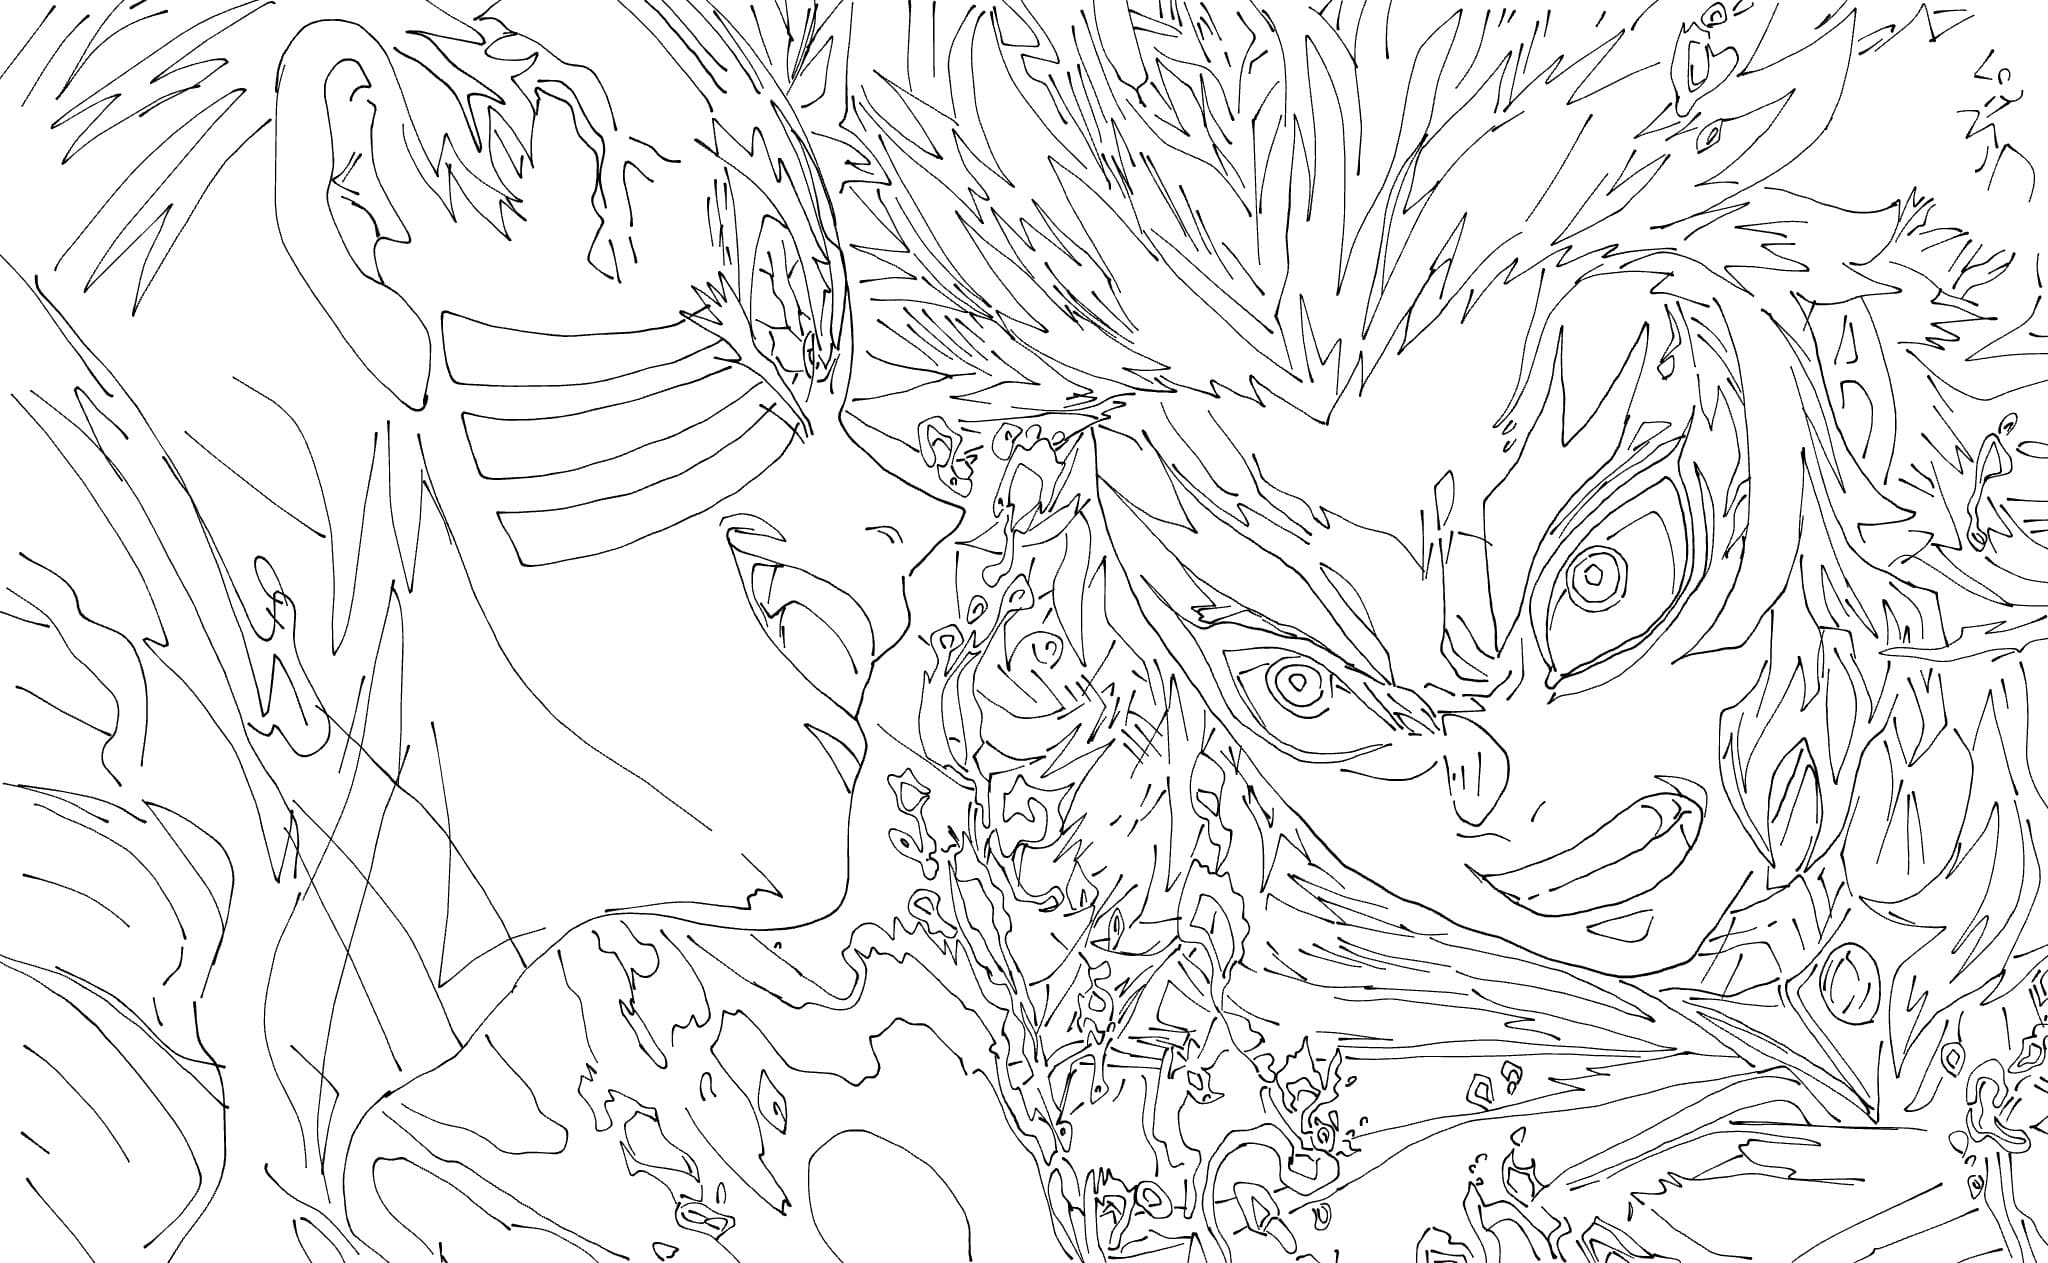 Coloring page Akaza vs Rengoku - a scene from the Anime